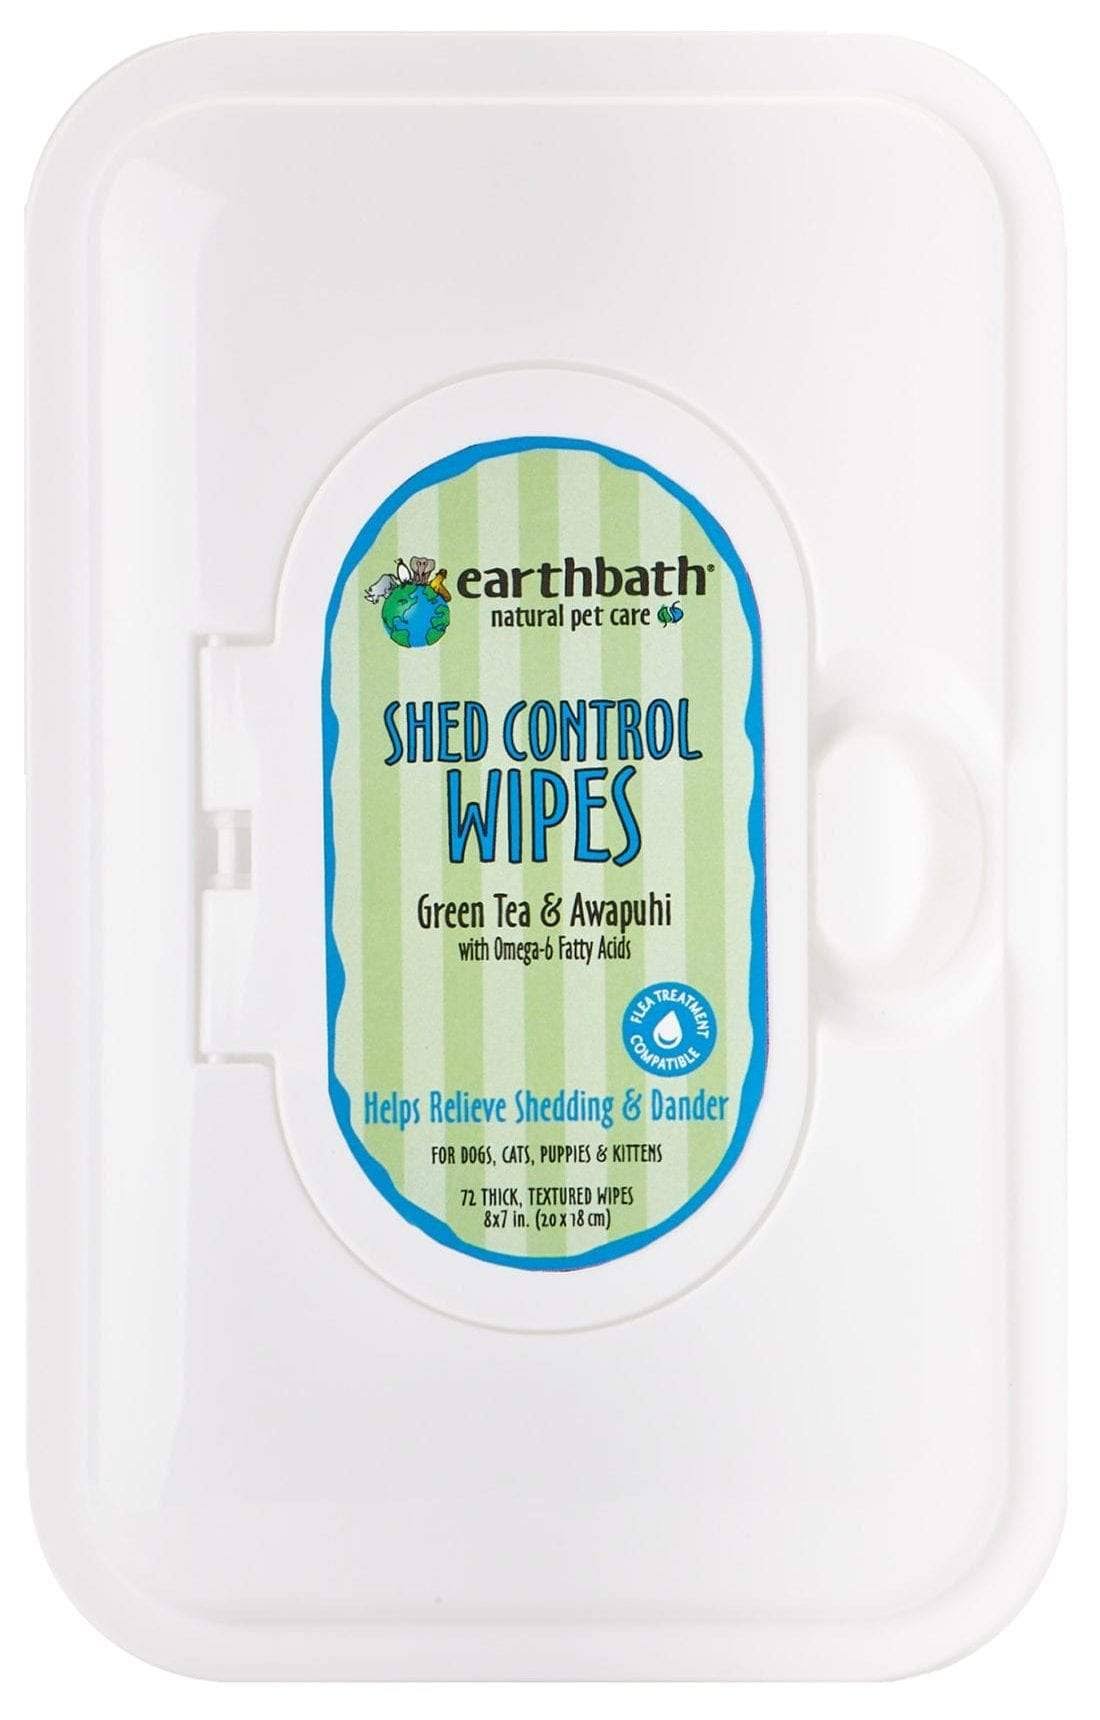 Earthbath Shed Control Wipes - 72 pack